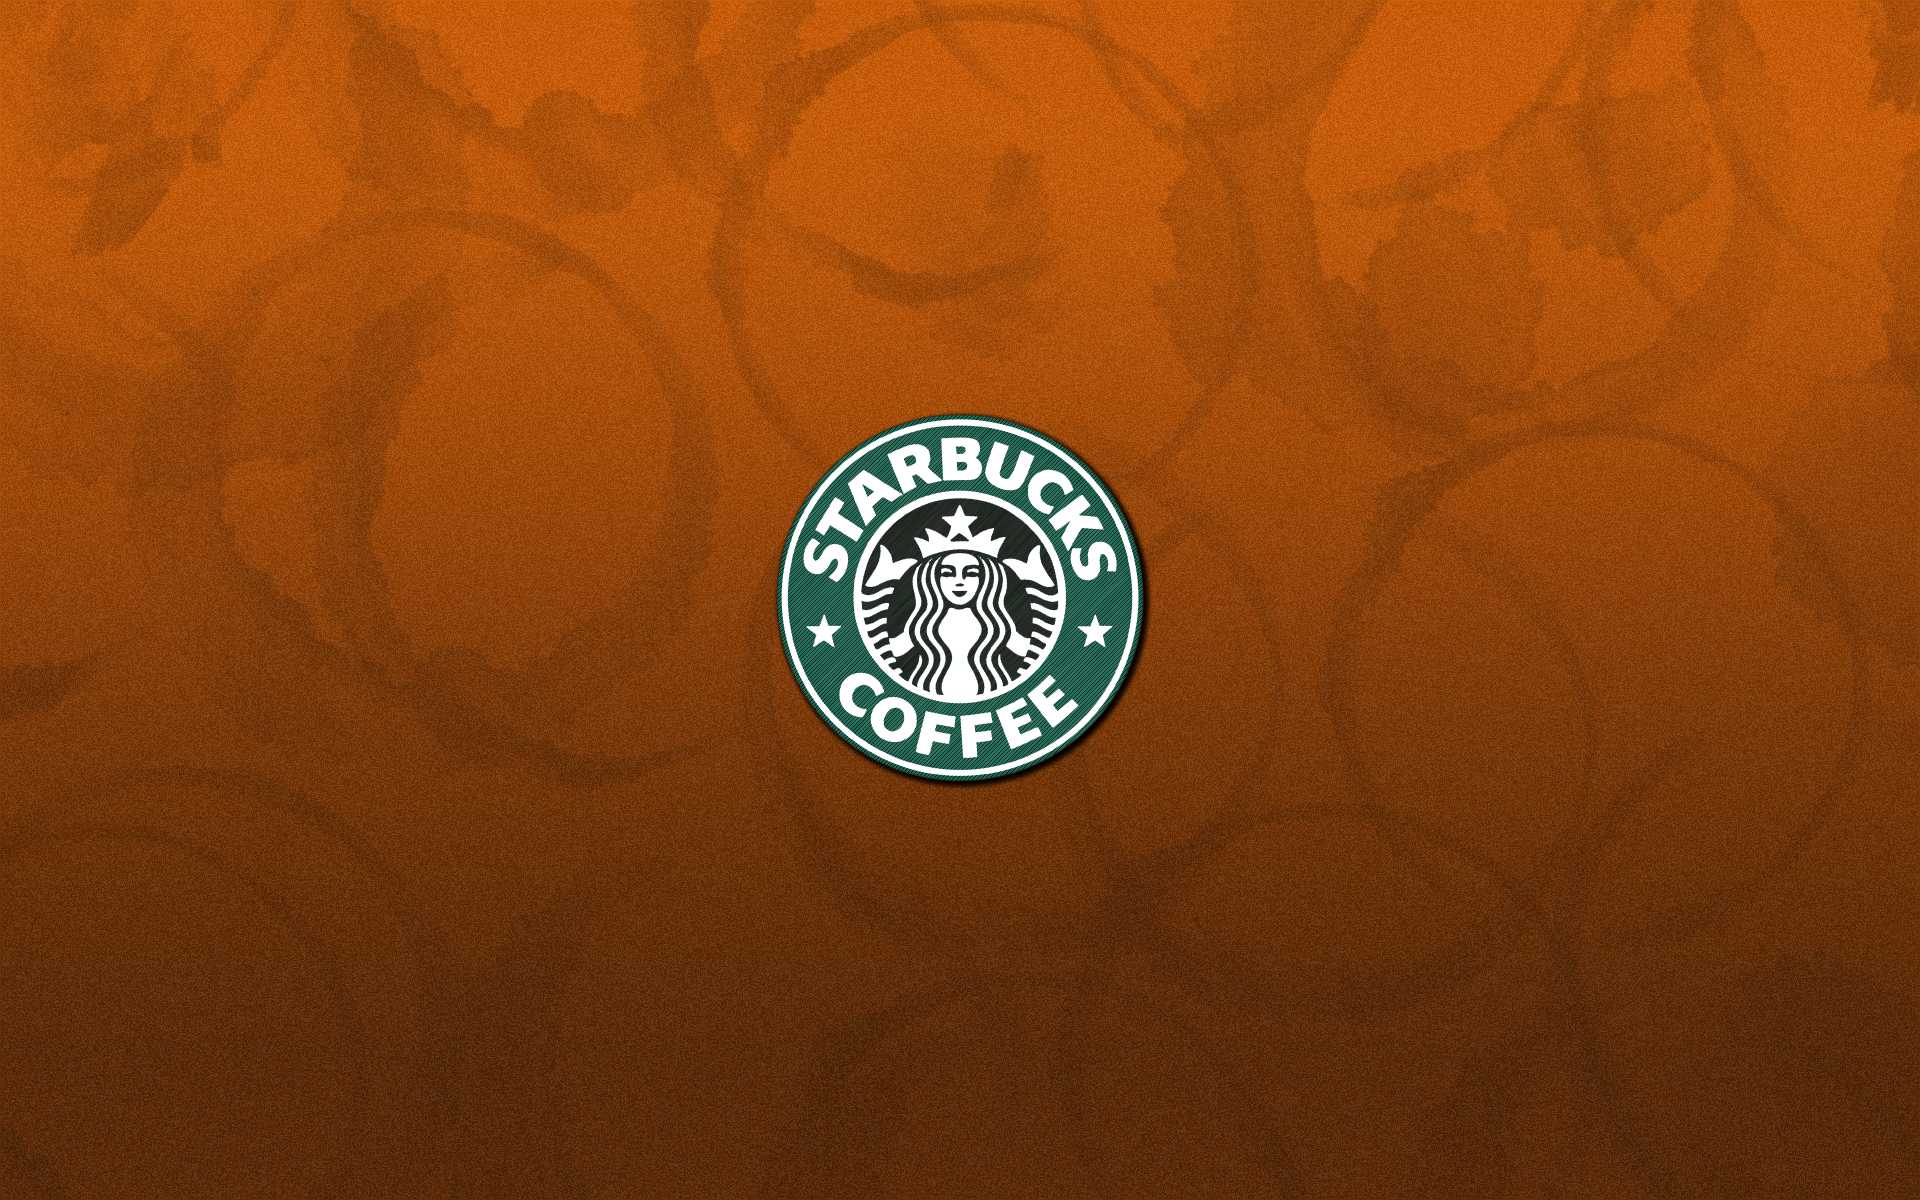 Starbucks Clipart Backgrounds For Powerpoint Templates – Ppt Pertaining To Starbucks Powerpoint Template